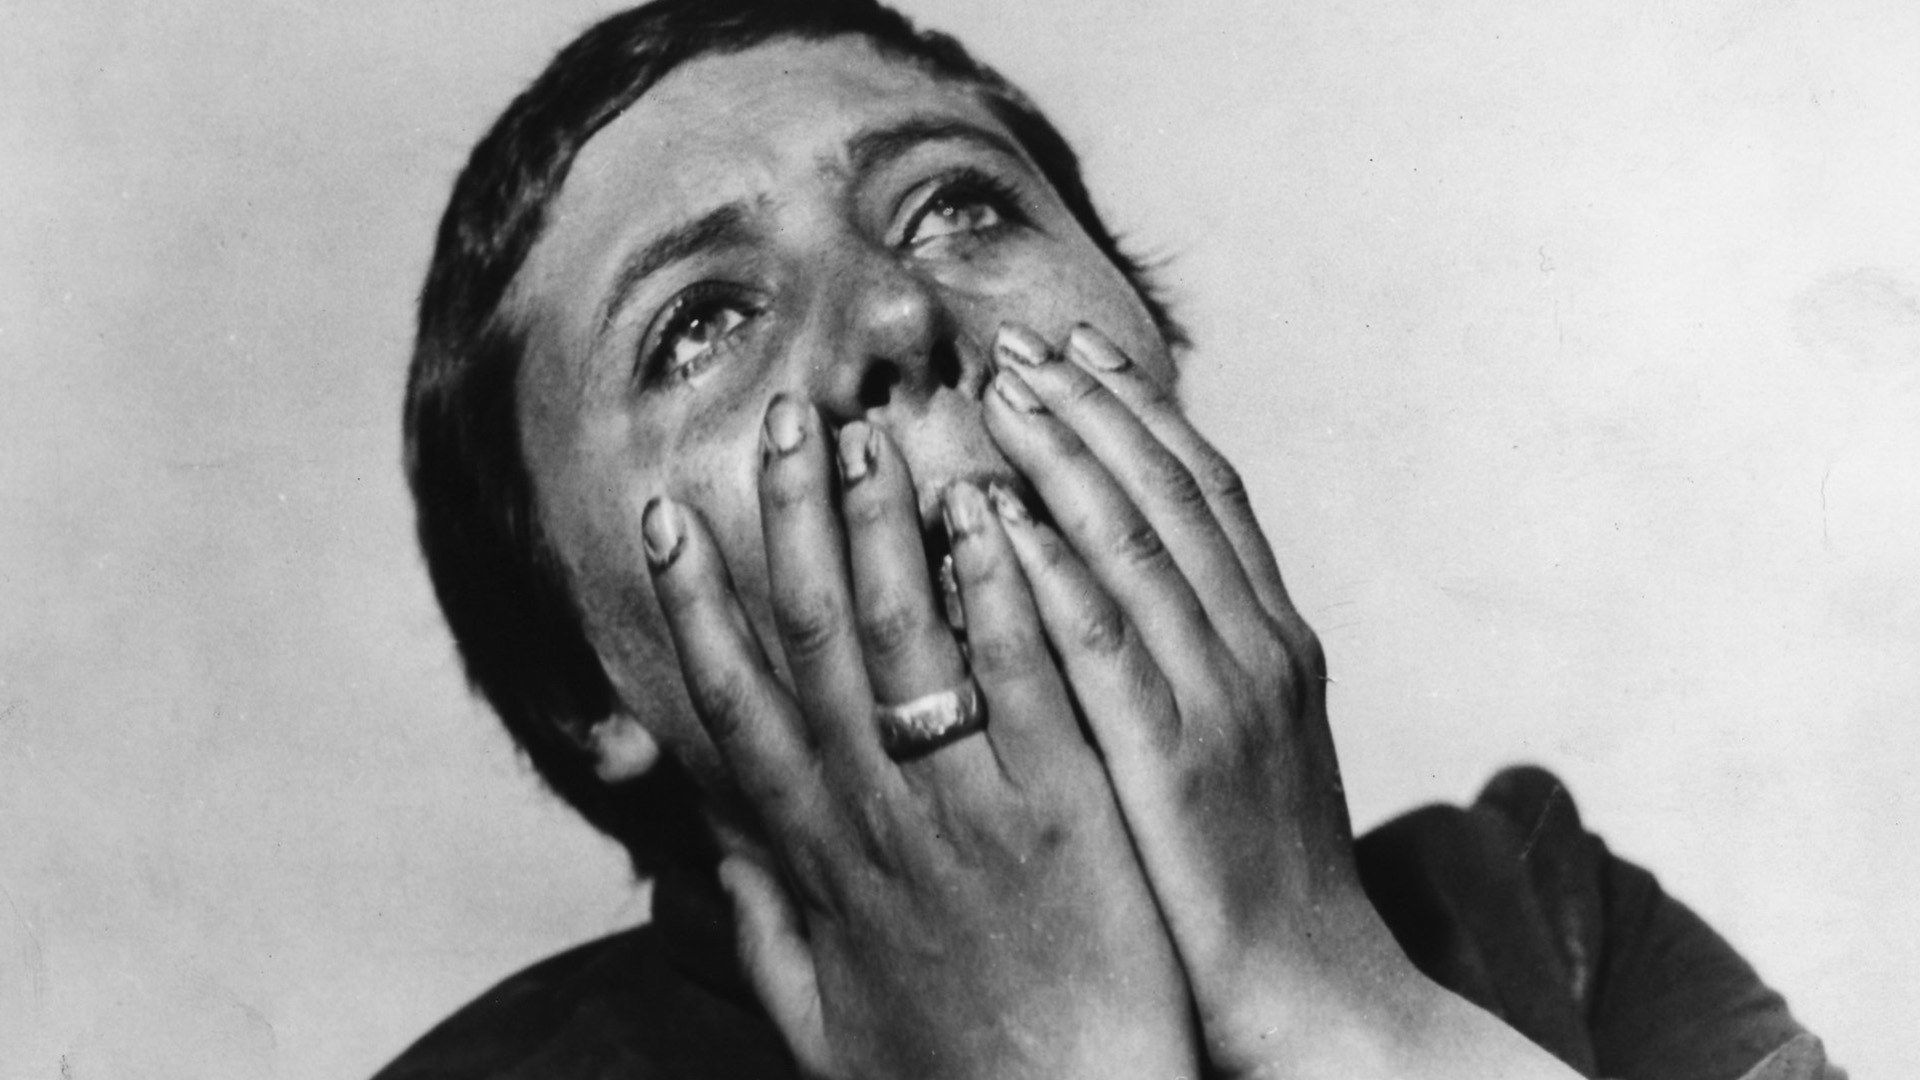 A close-up of the Joan's face struggling and covering it with her hands